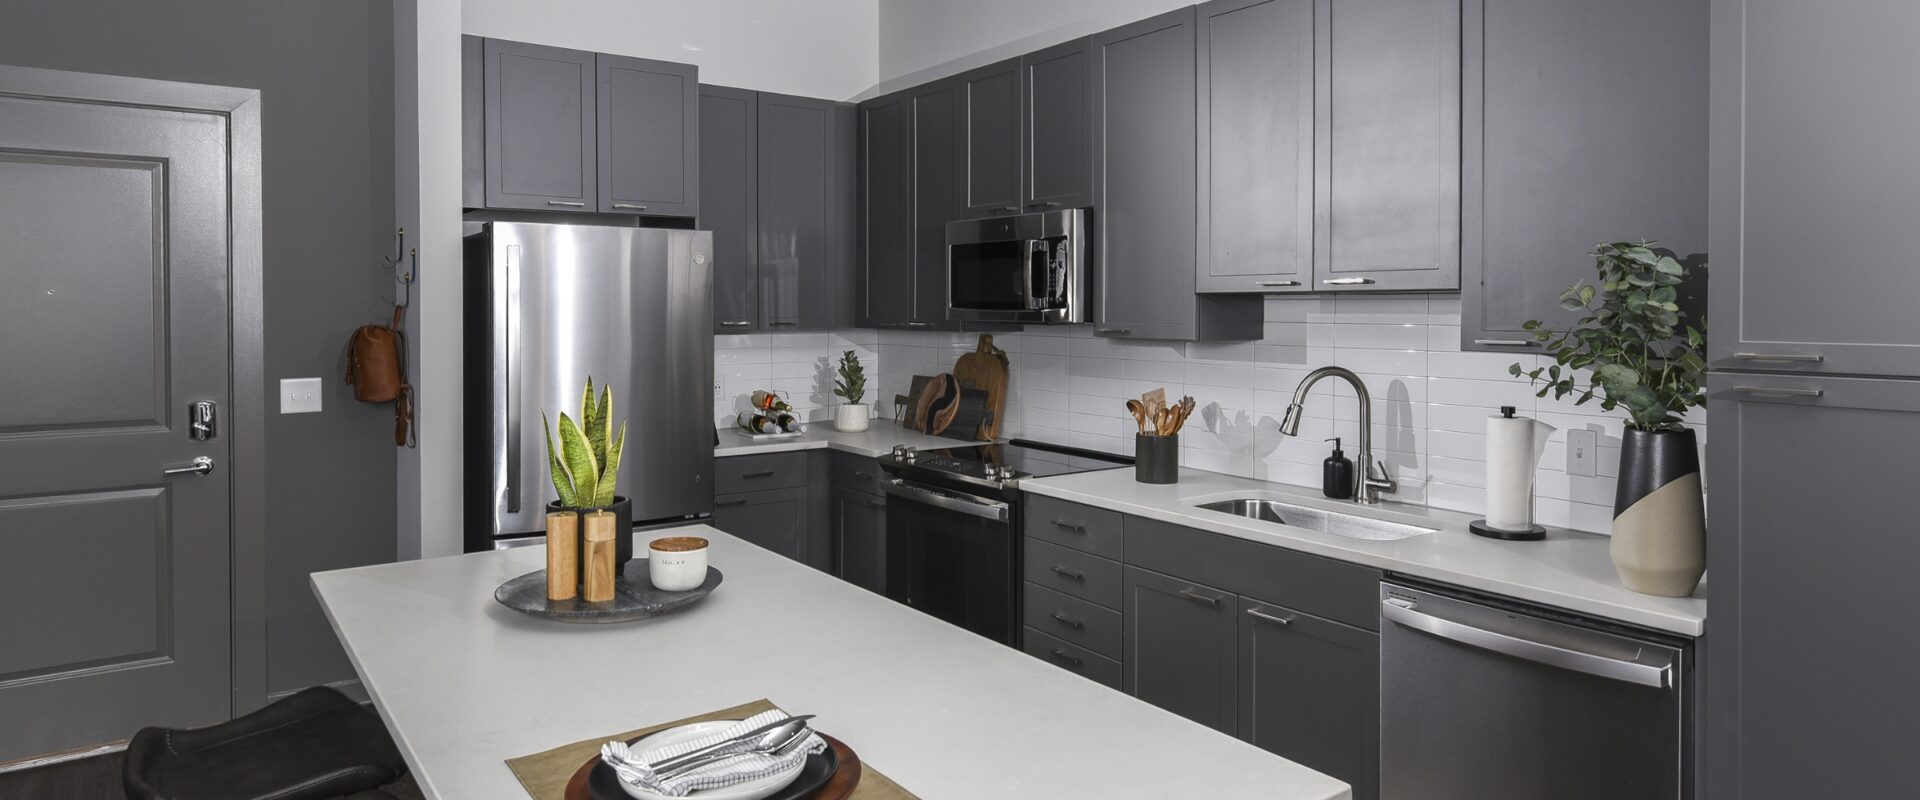 Modern kitchen with island at our Federal Hill apartments.